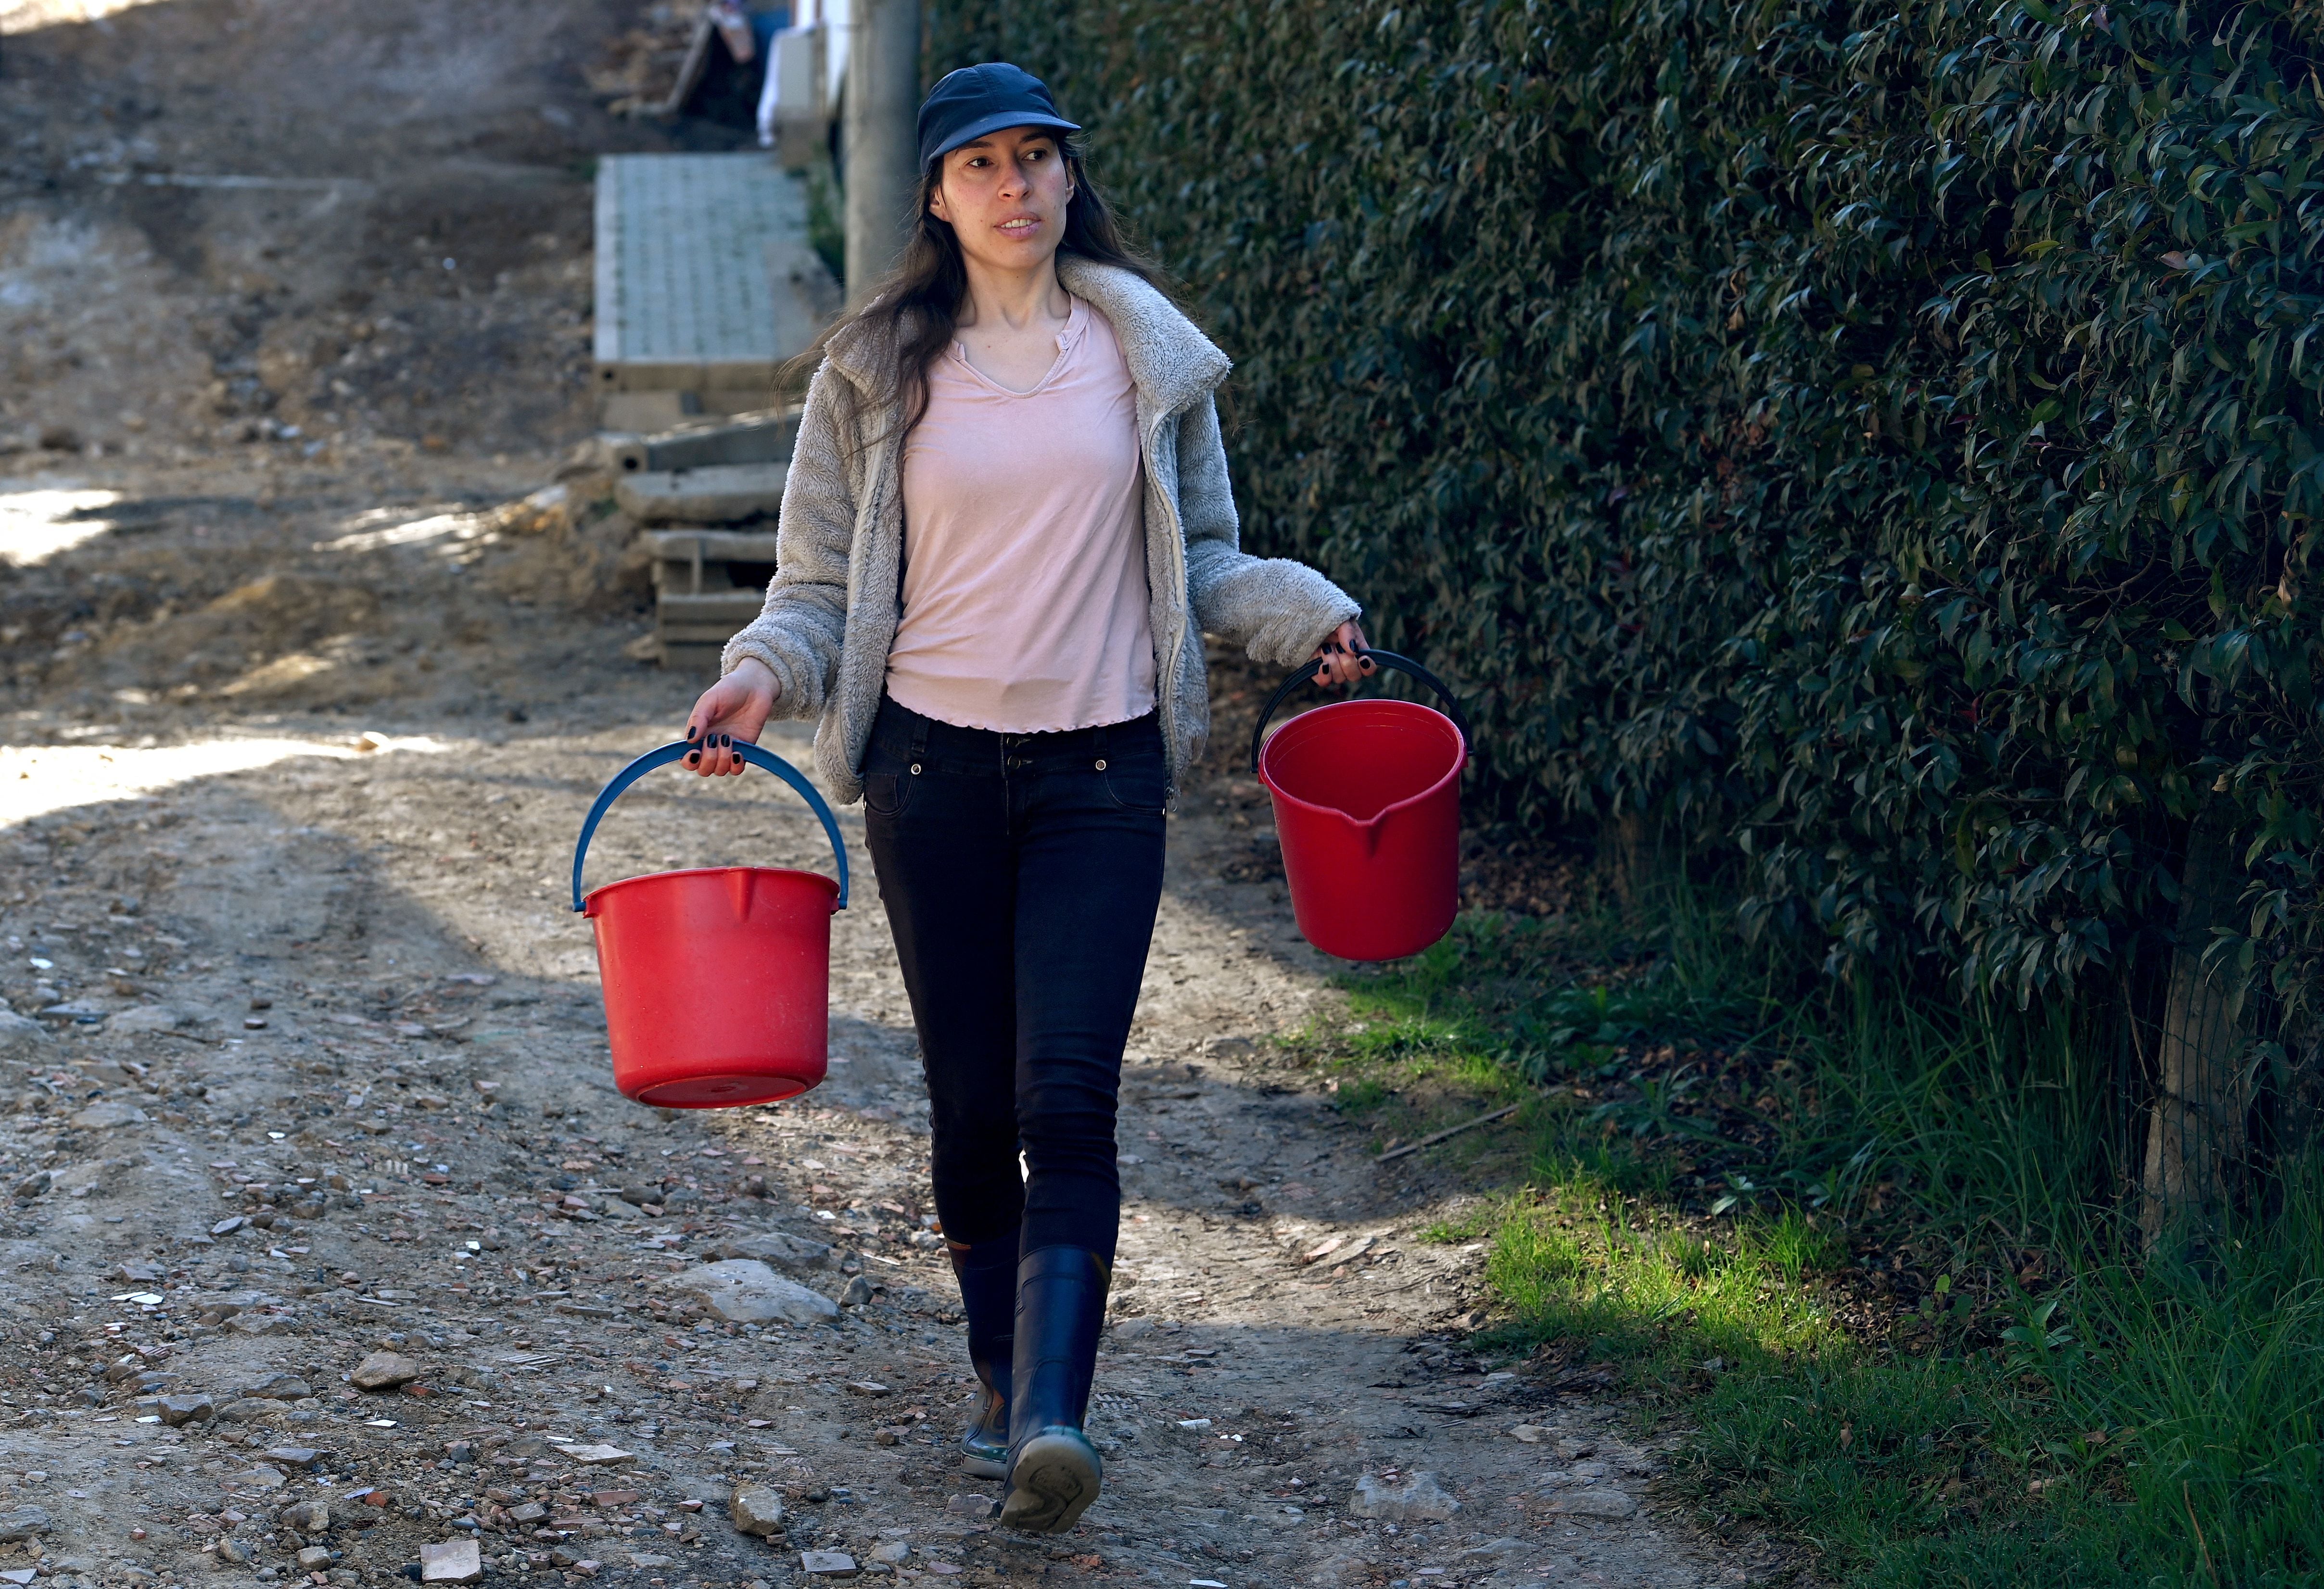 Graphic designer Clara Escobar carries buckets to collect drinking water from a tanker truck in La Calera, near Bogotá, on April 10, 2024. (Photo by Daniel MUÑOZ/AFP).